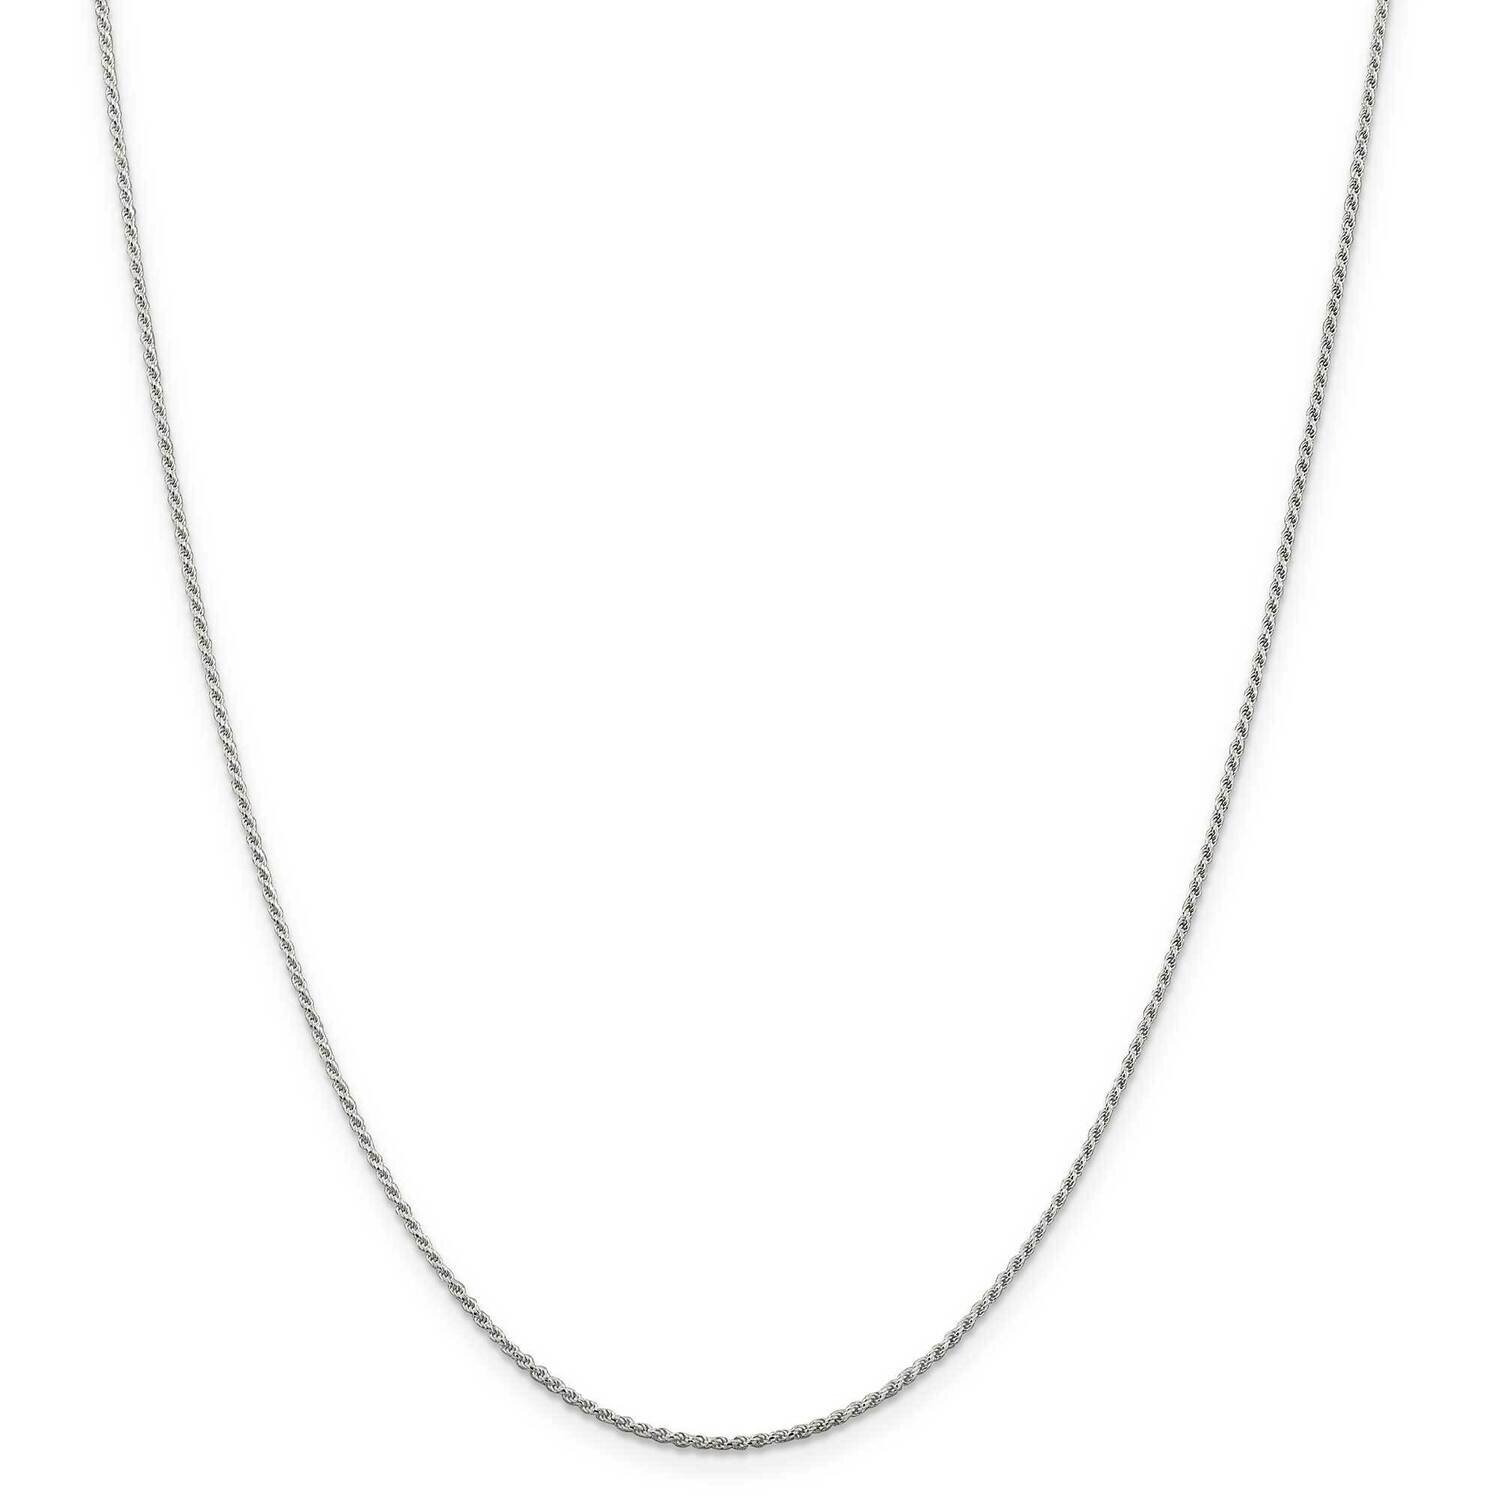 1.1mm Diamond-Cut Rope Chain 14 Inch Sterling Silver QDC015-14